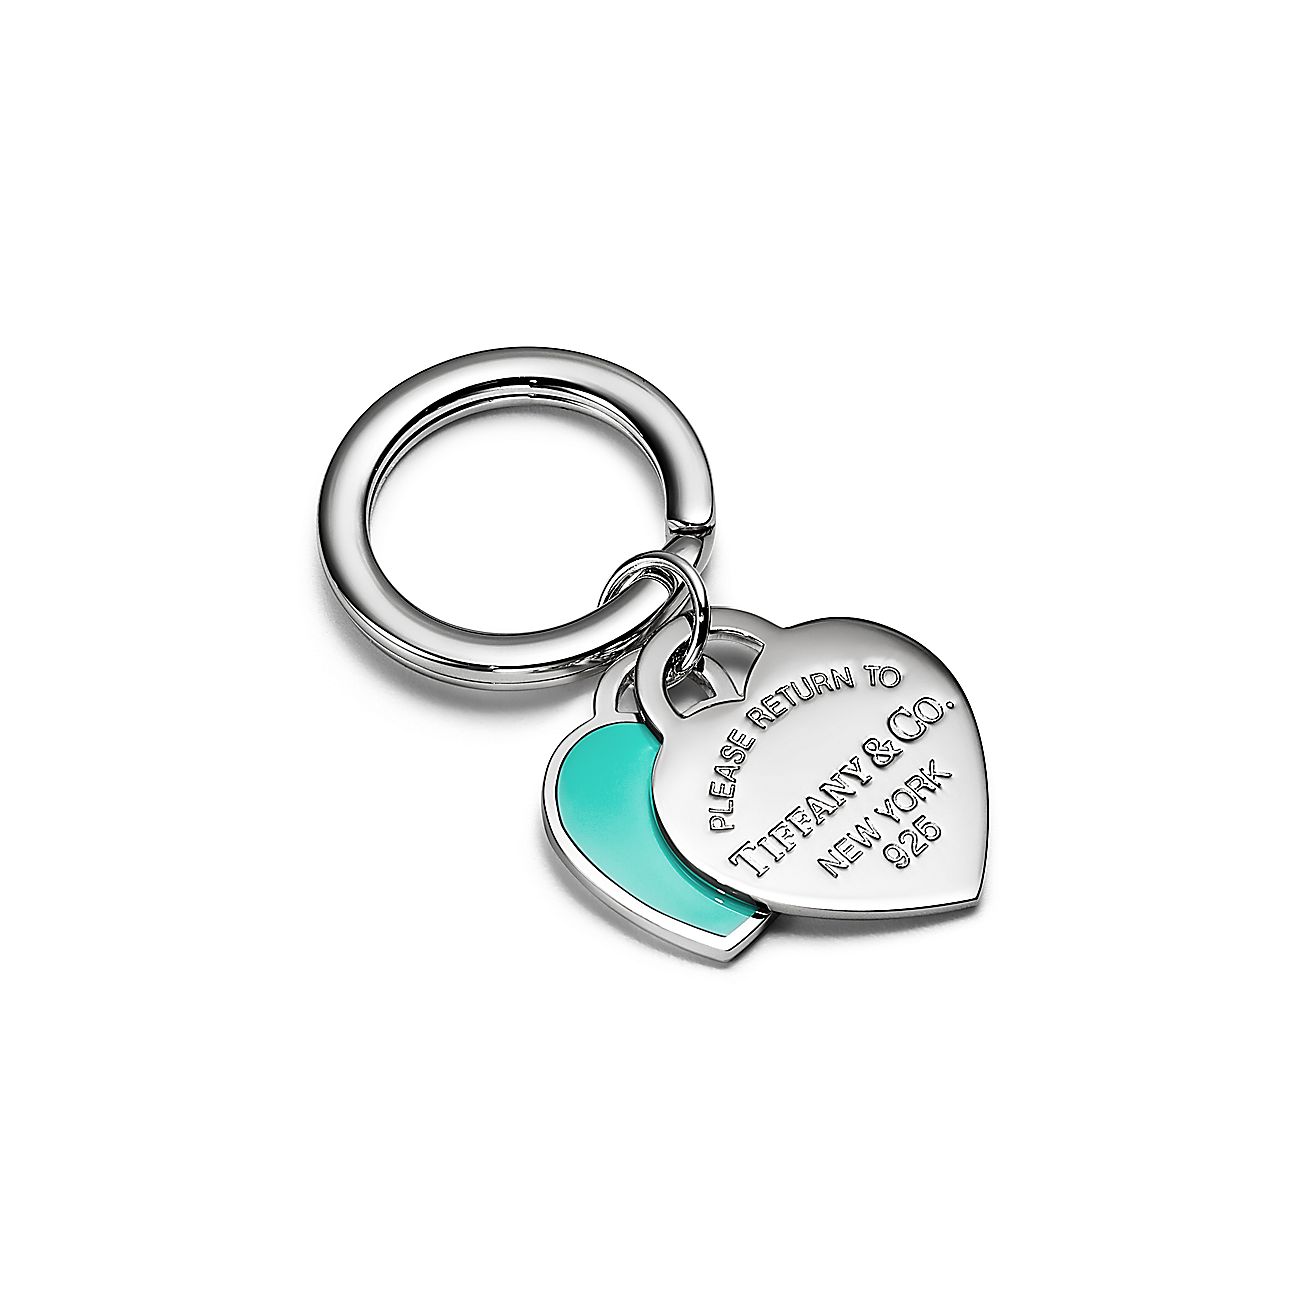 Tiffany & Co. Round Tag Key Ring in Sterling Silver